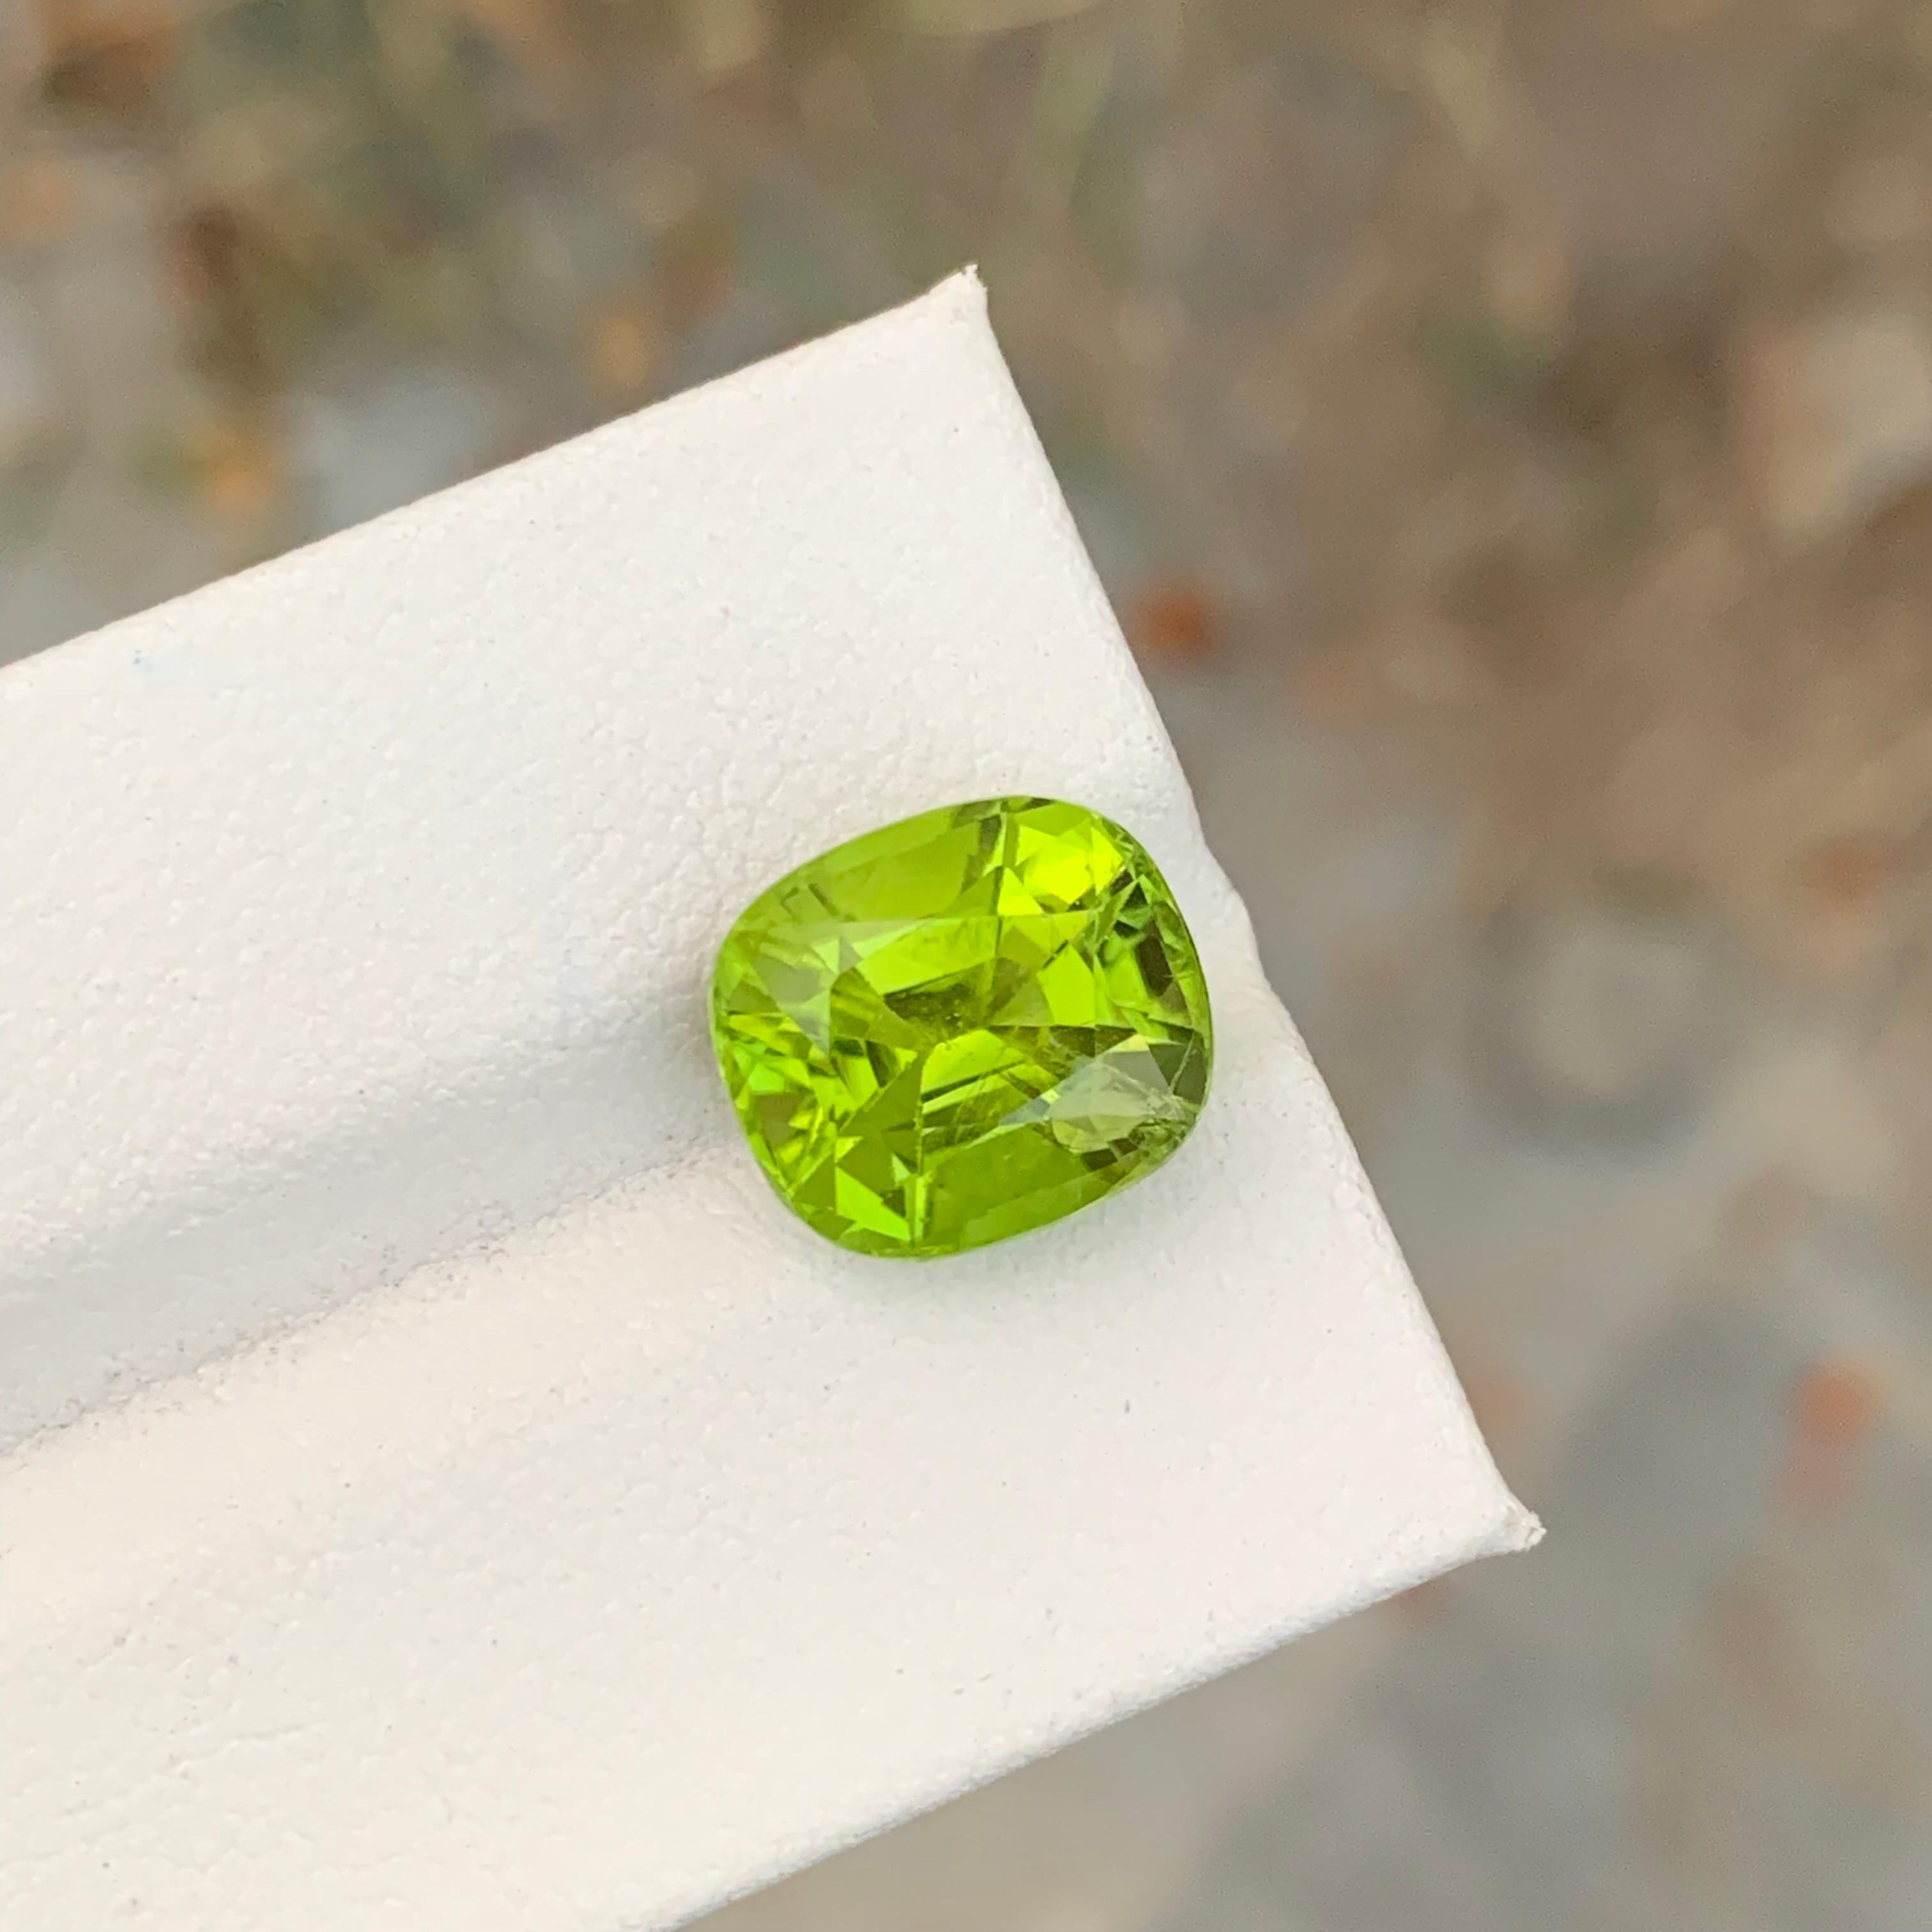 Antique Cushion Cut Stunning Natural Faceted Green Peridot Ring Gemstone 6.05 Carats  For Sale